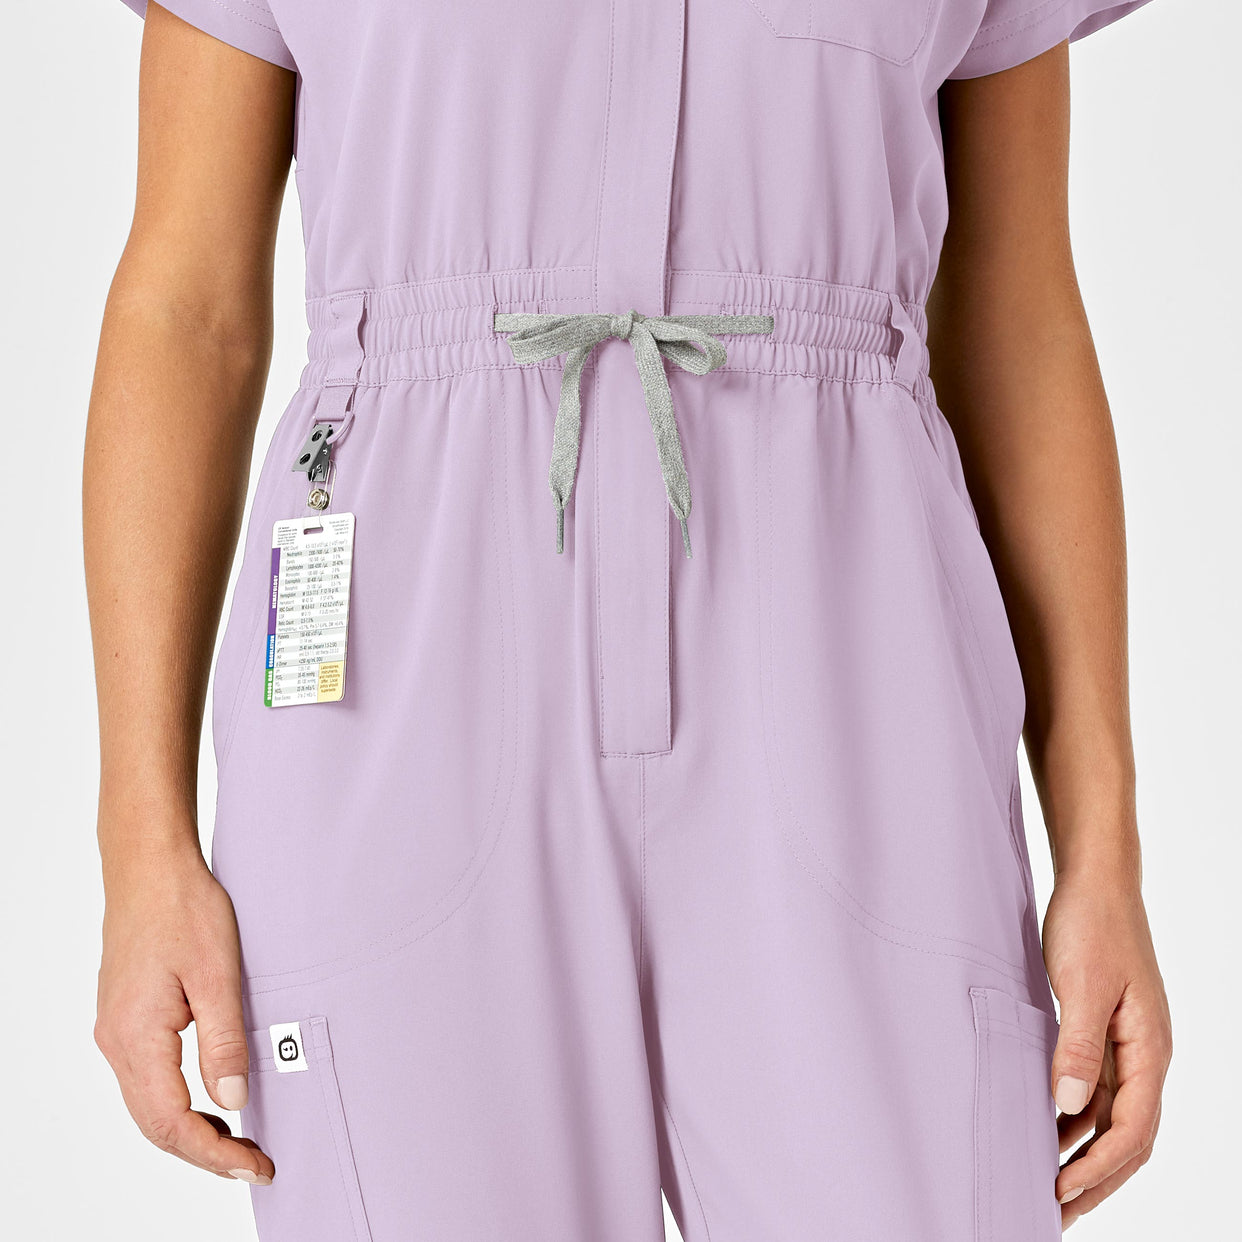 RENEW Women's Zip Front Scrub Jumpsuit Pastel Lilac waistband detail and badge loop